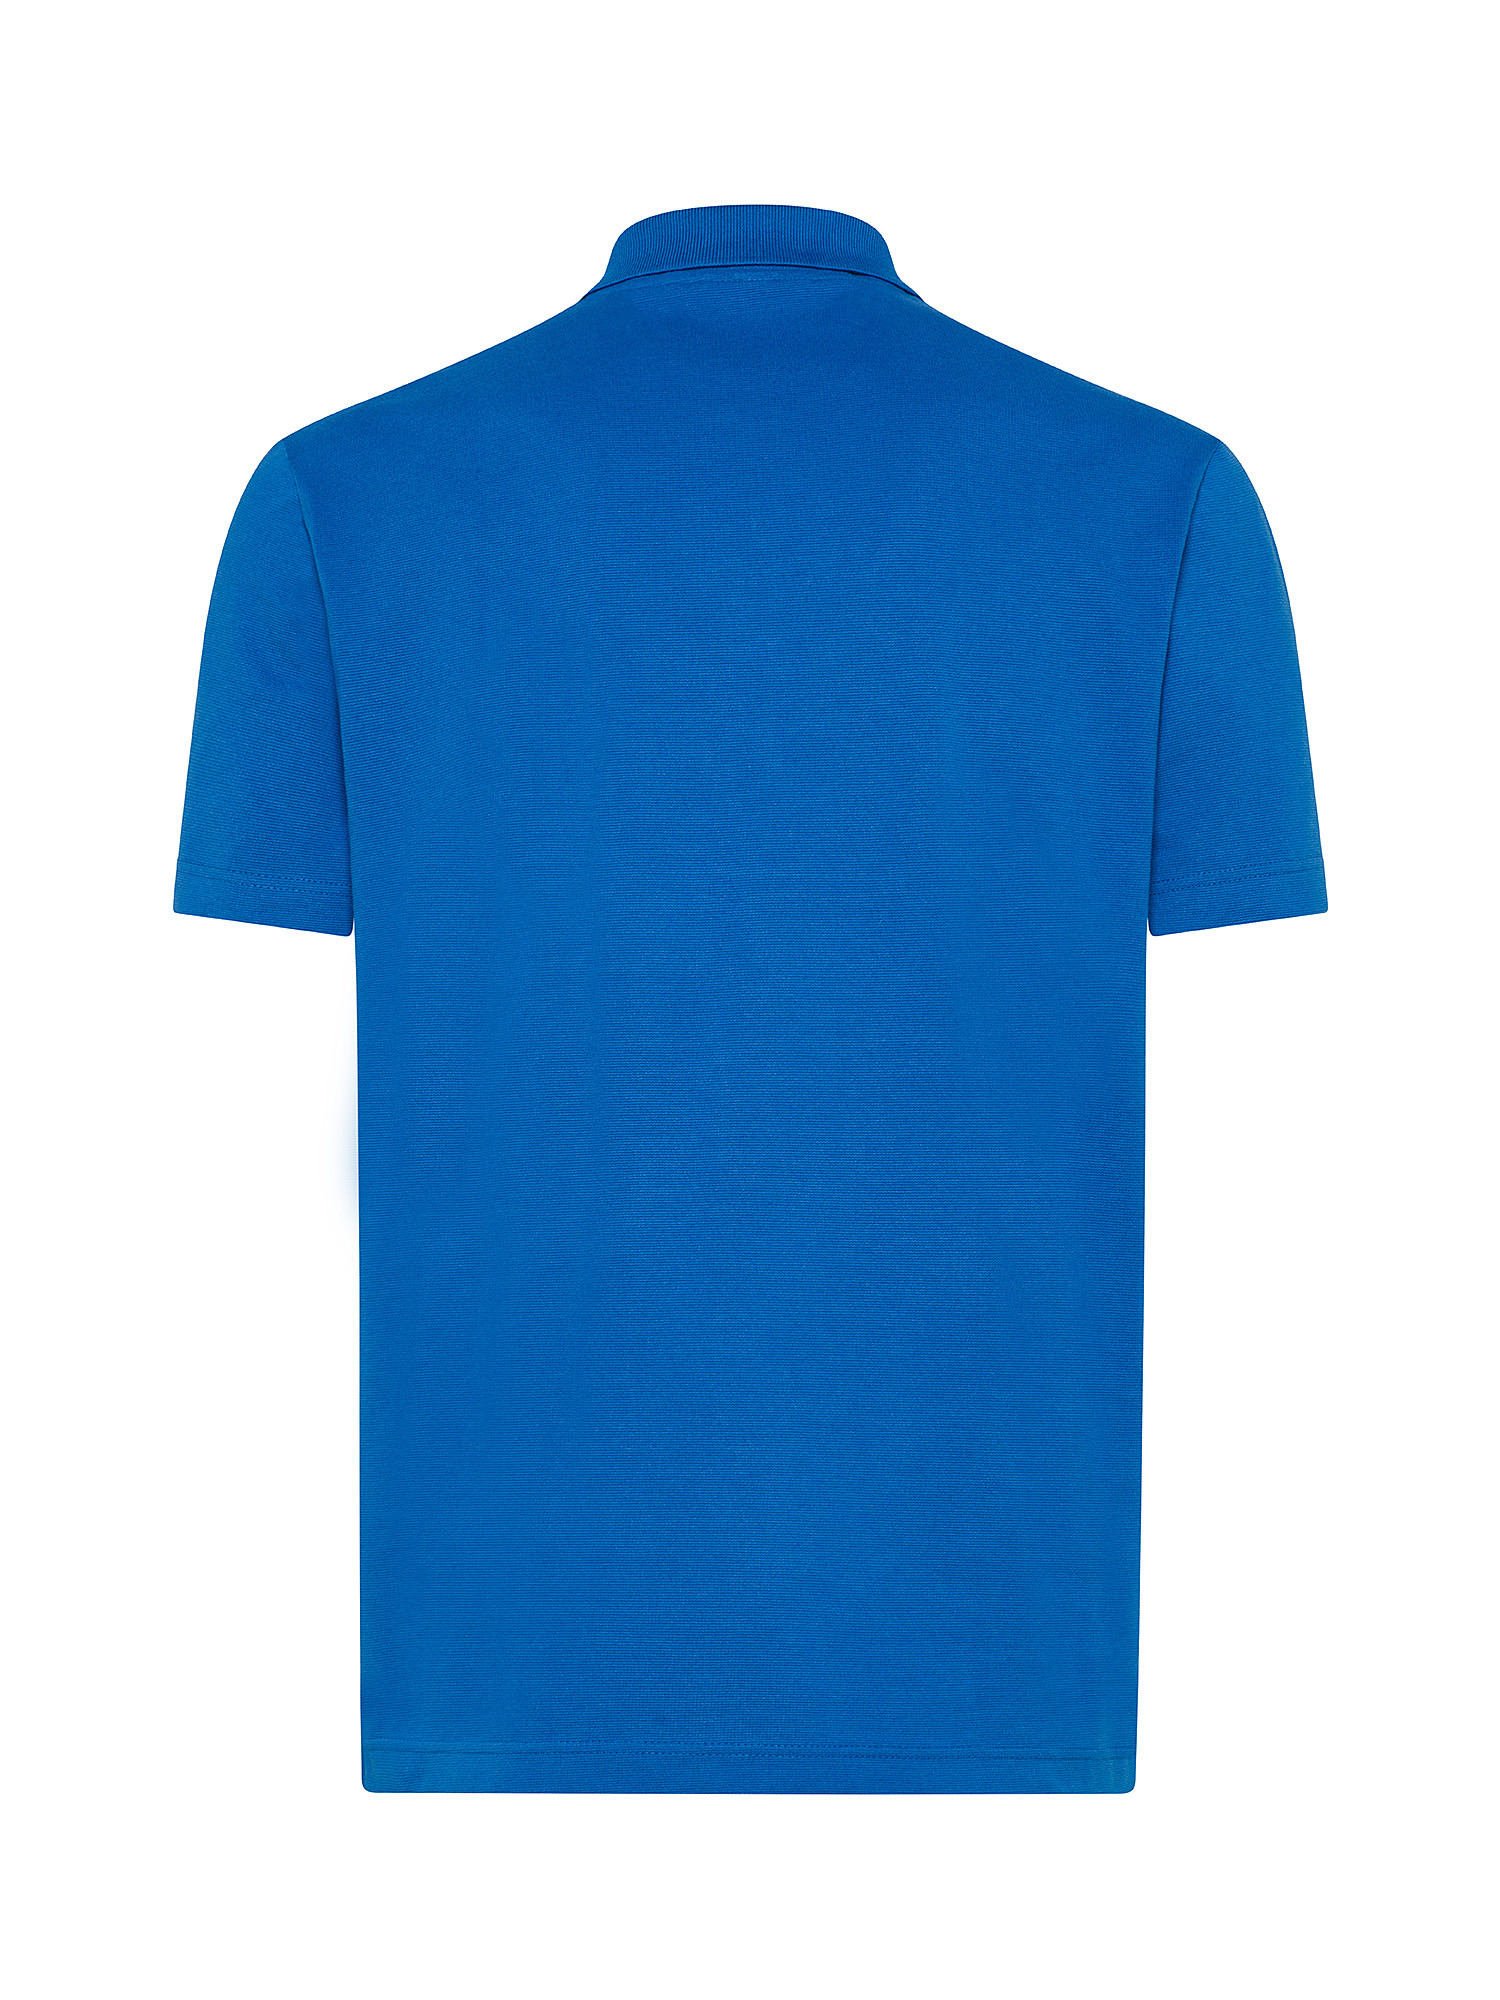 Lacoste - Regular fit stretch polo, Blue, large image number 1